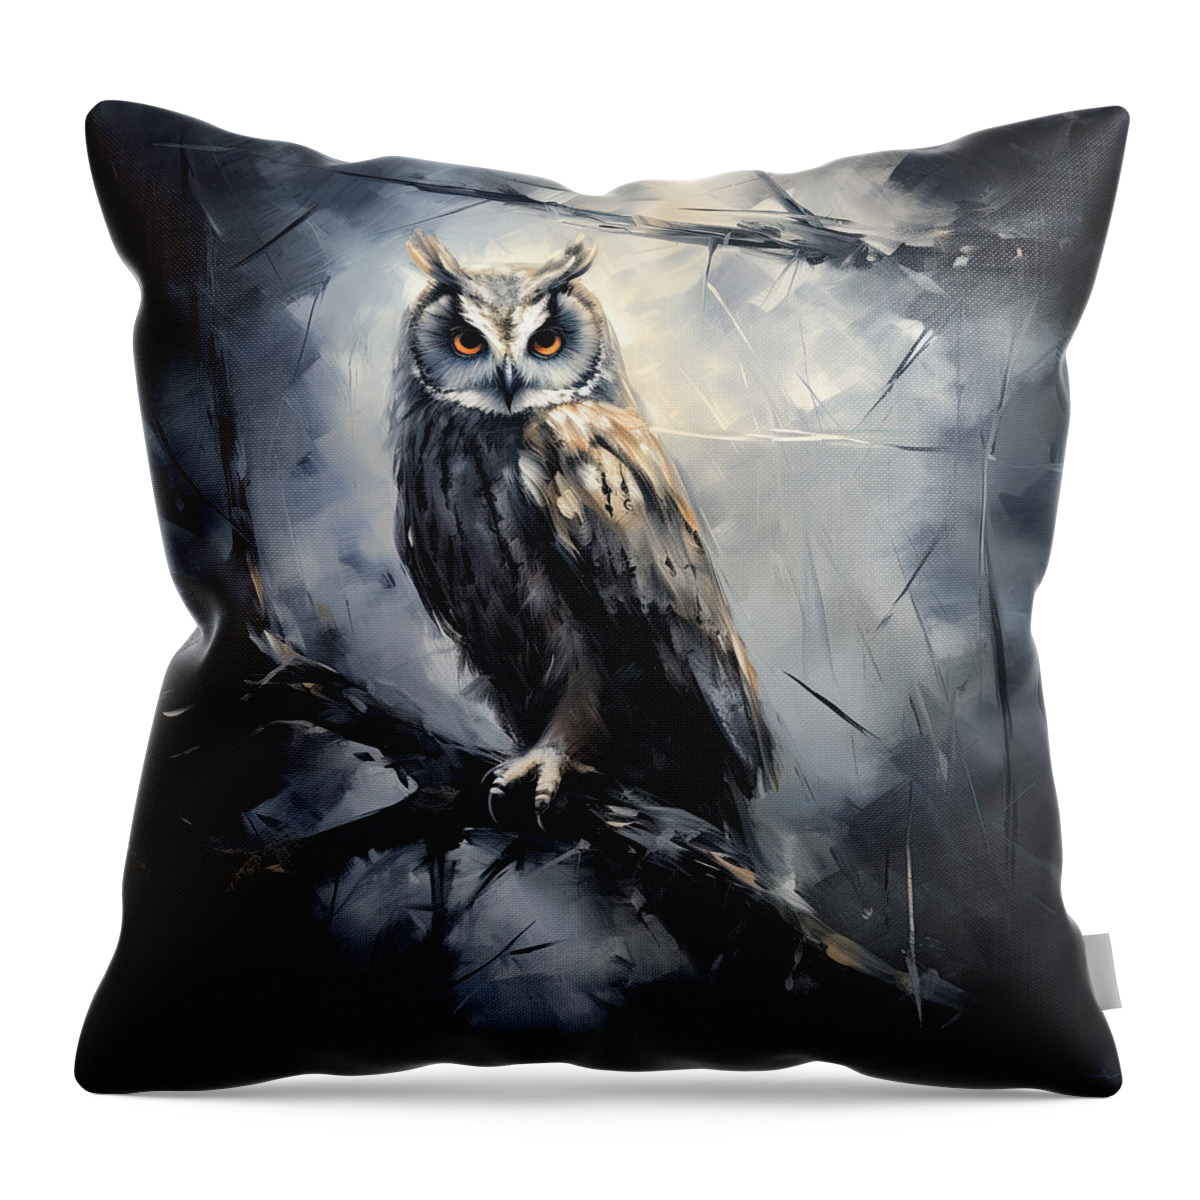 Owl Throw Pillow featuring the painting Owl's Watch - Mysterious Owl Art by Lourry Legarde